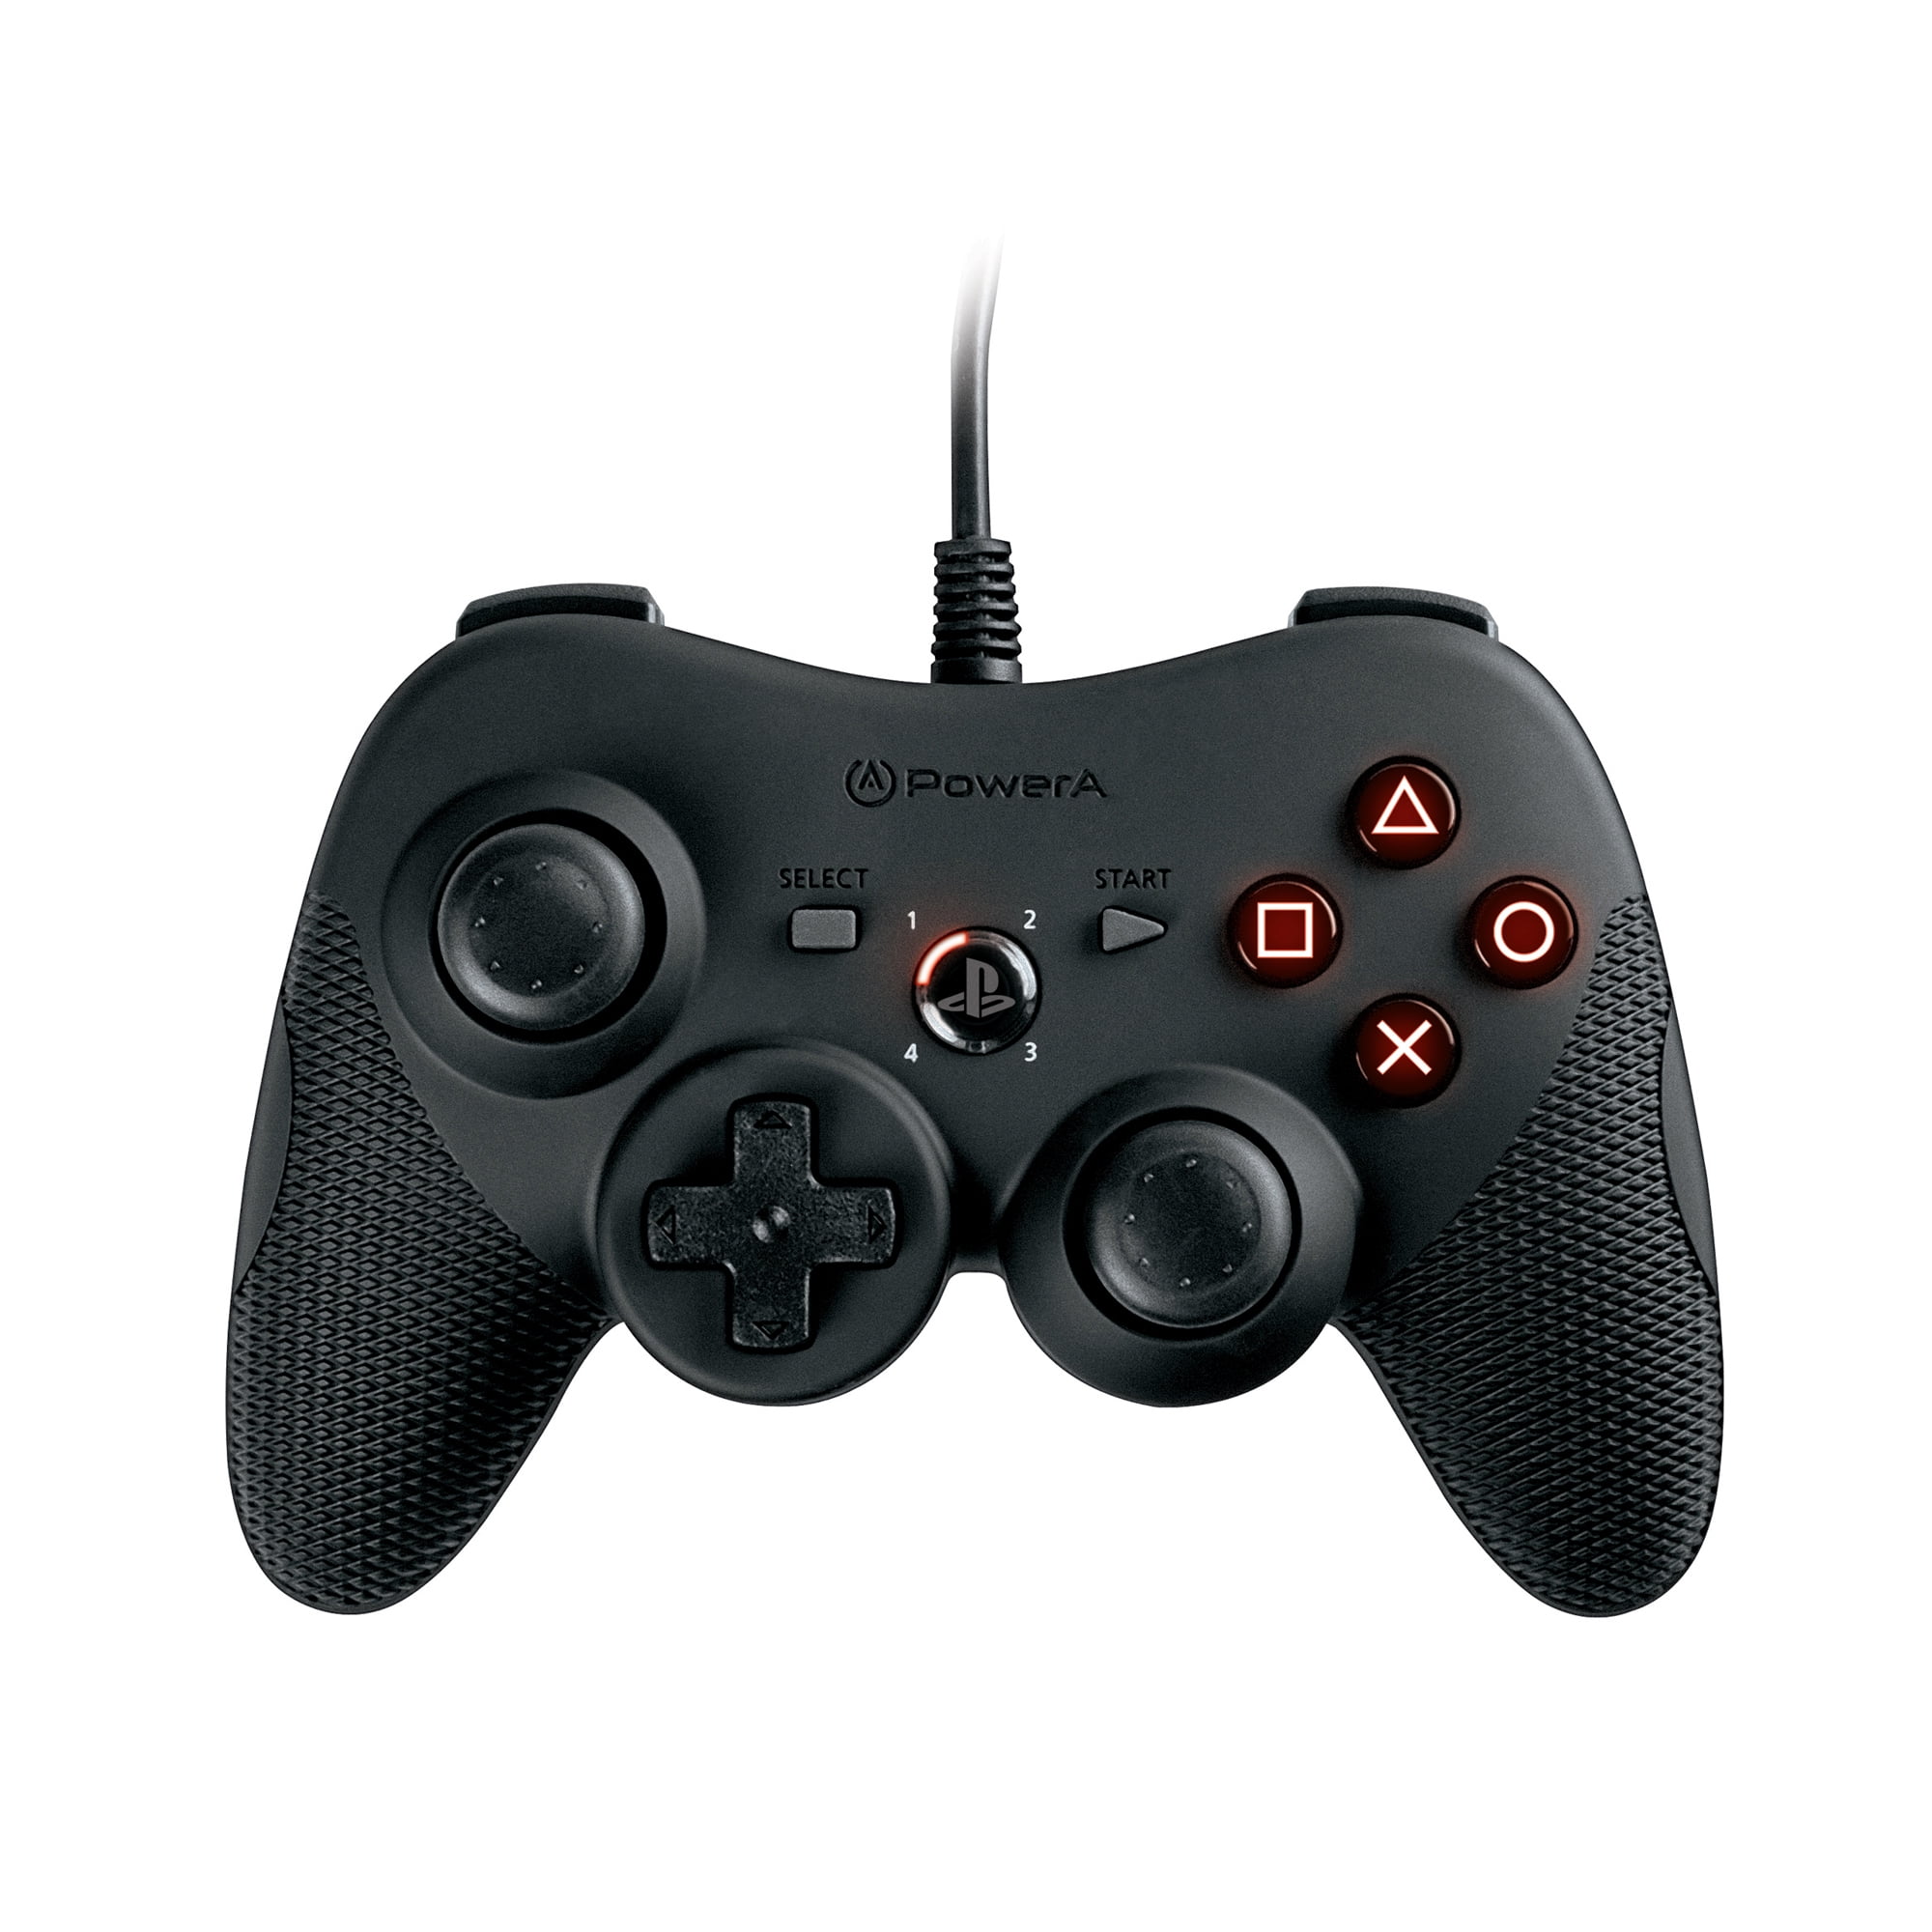 ps3 pro controller